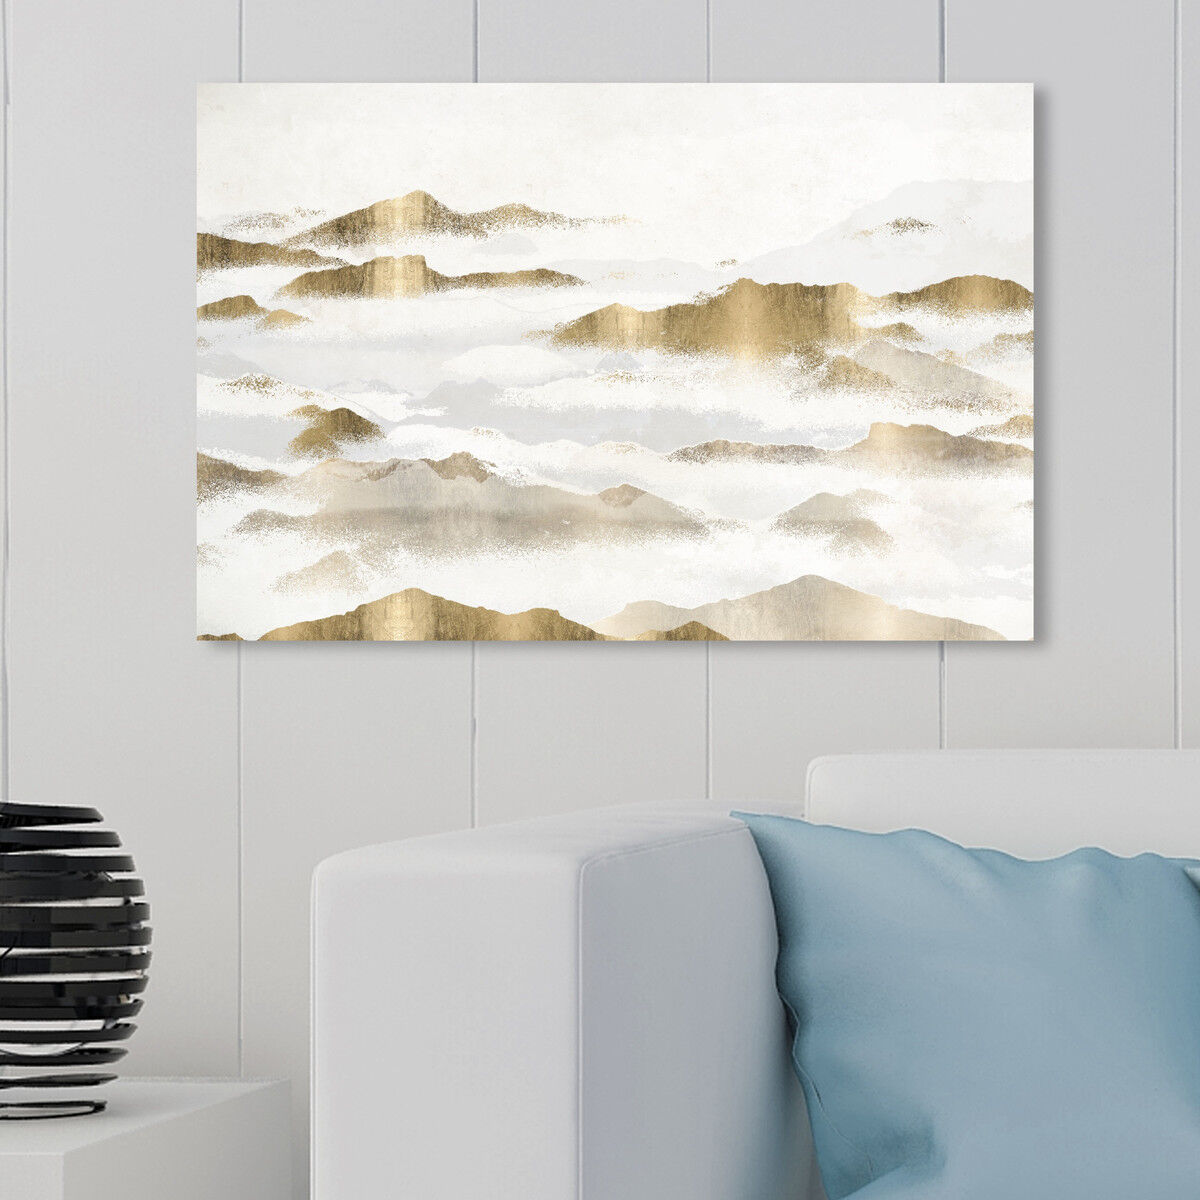 Landscape and Nature Wall Art | Oliver Gal